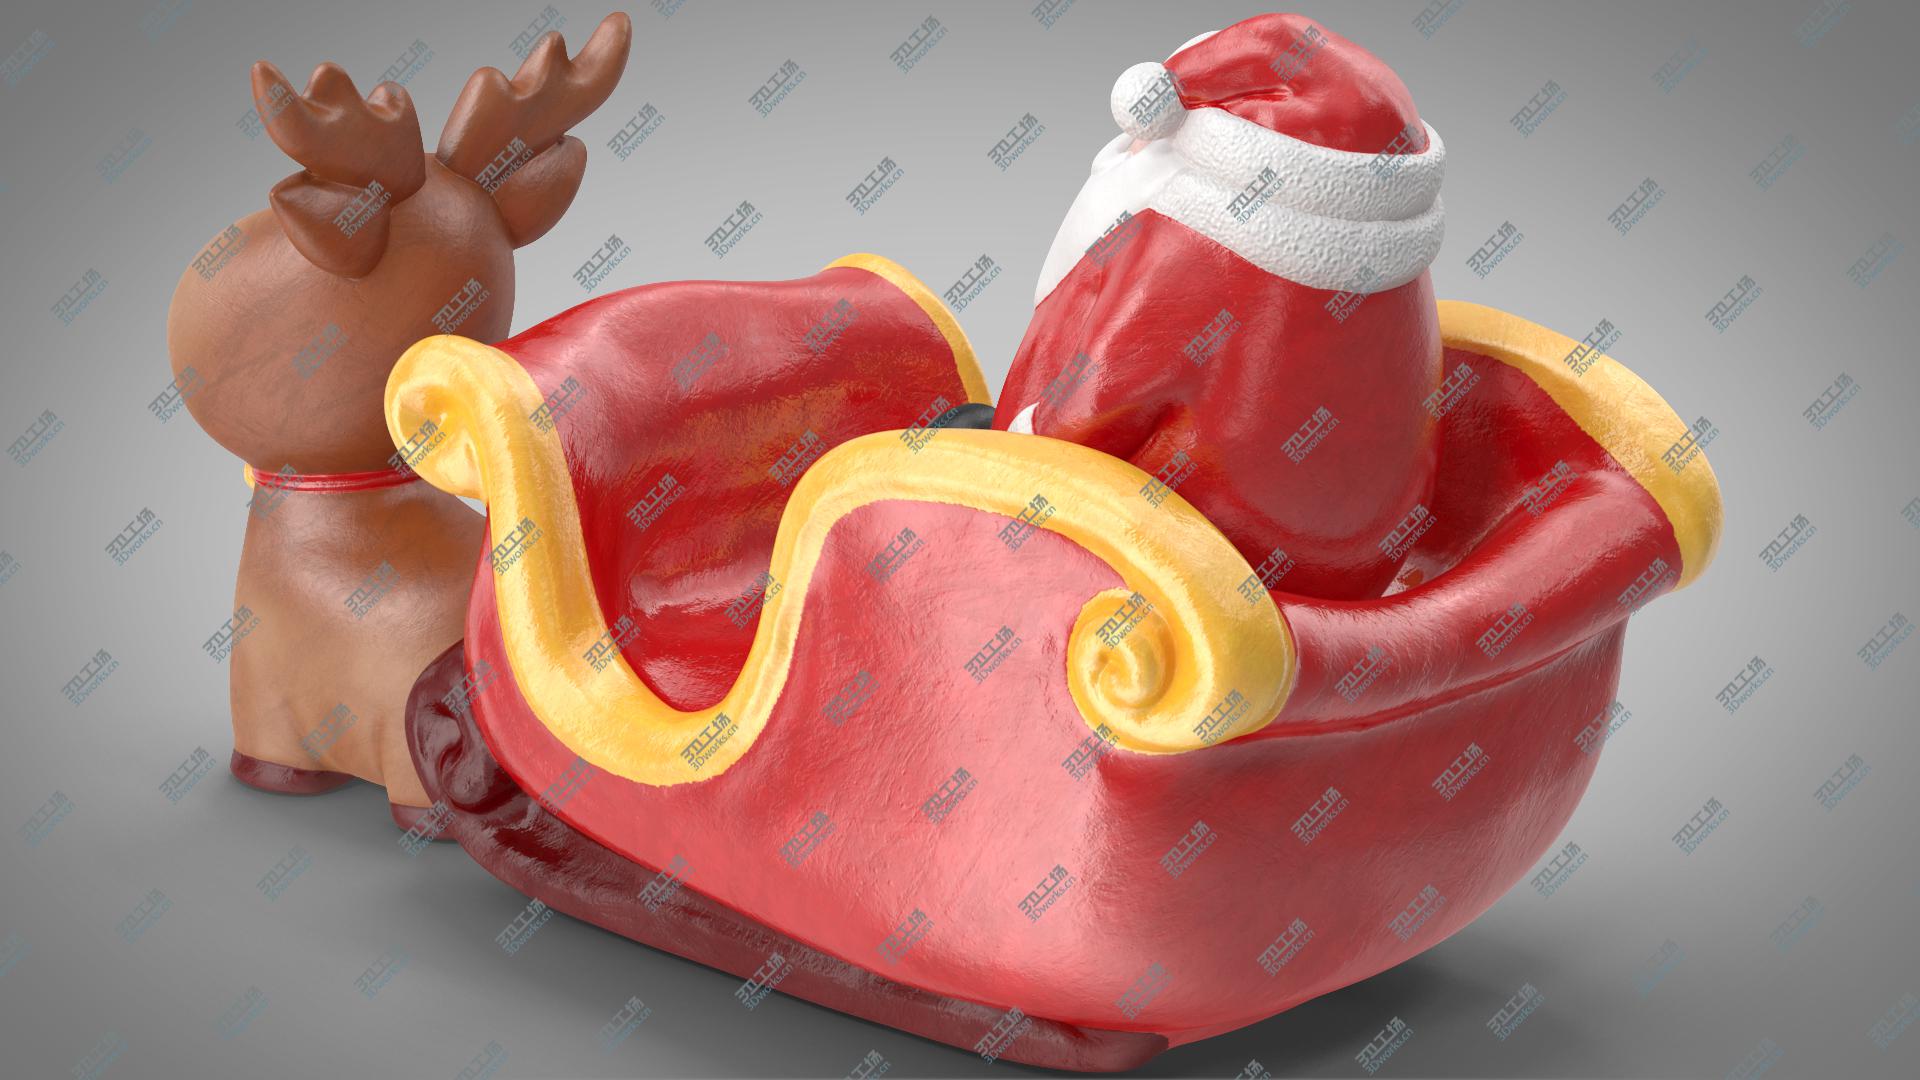 images/goods_img/202105071/3D Santa Claus with Sleigh Decorative Figurine model/5.jpg